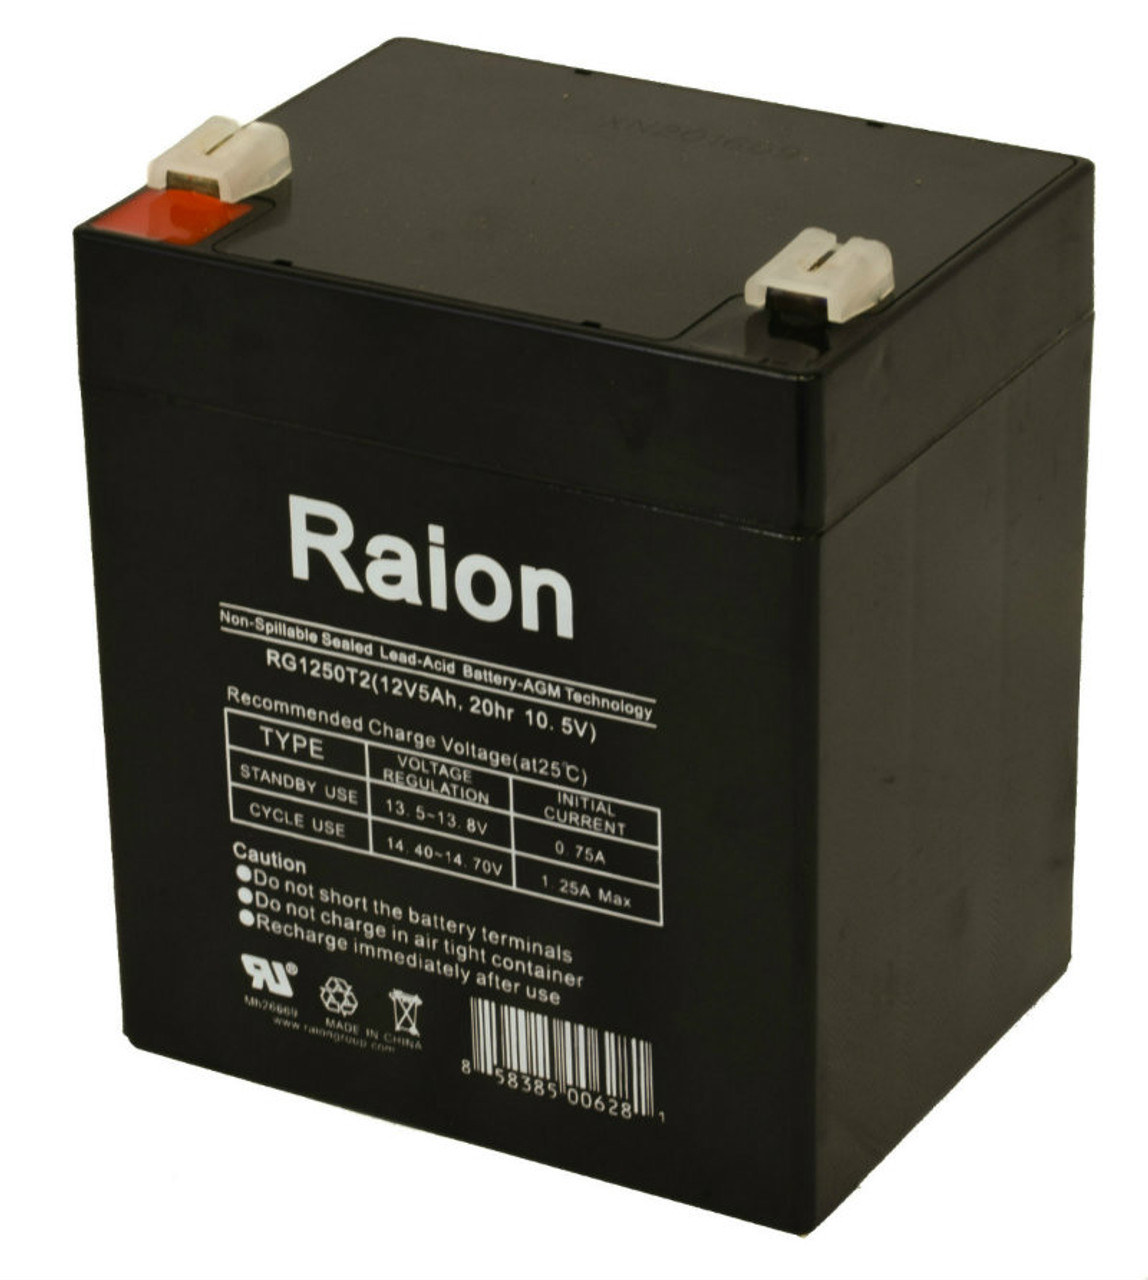 Raion Power RG1250T1 Replacement Battery for GF Health Products Lumex LF2020 Patient Lift